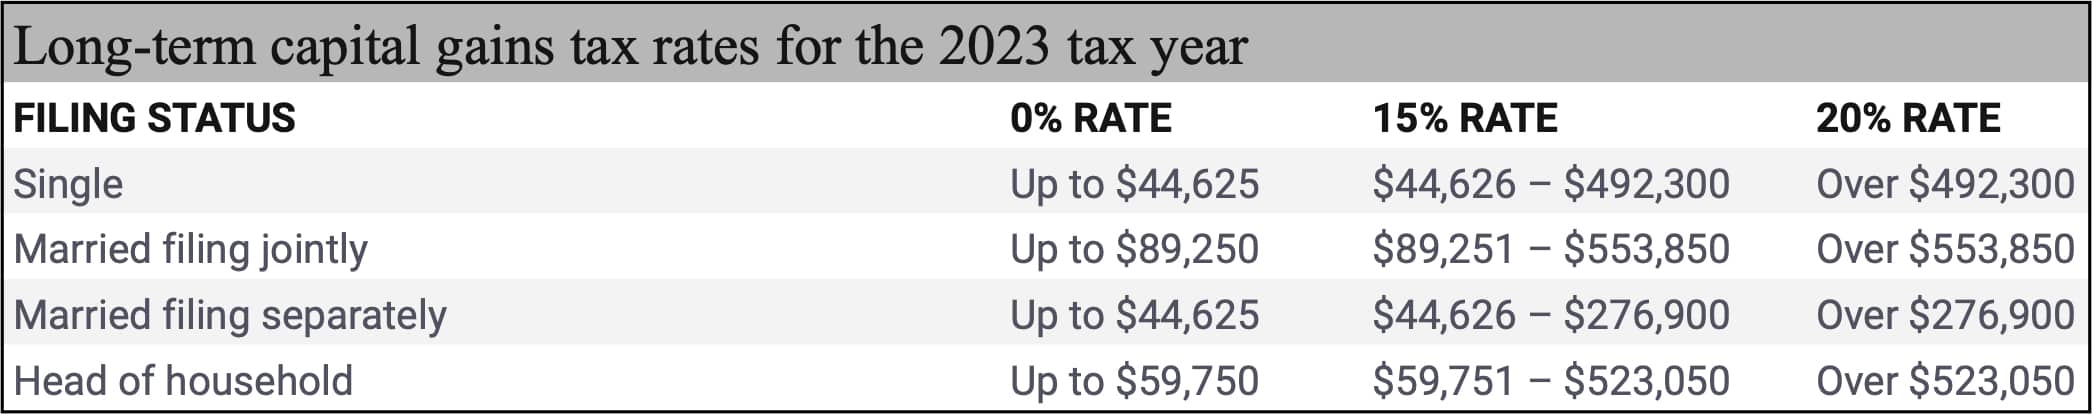 Table Showing Long Term Capital Gains Tax Rates for 2023